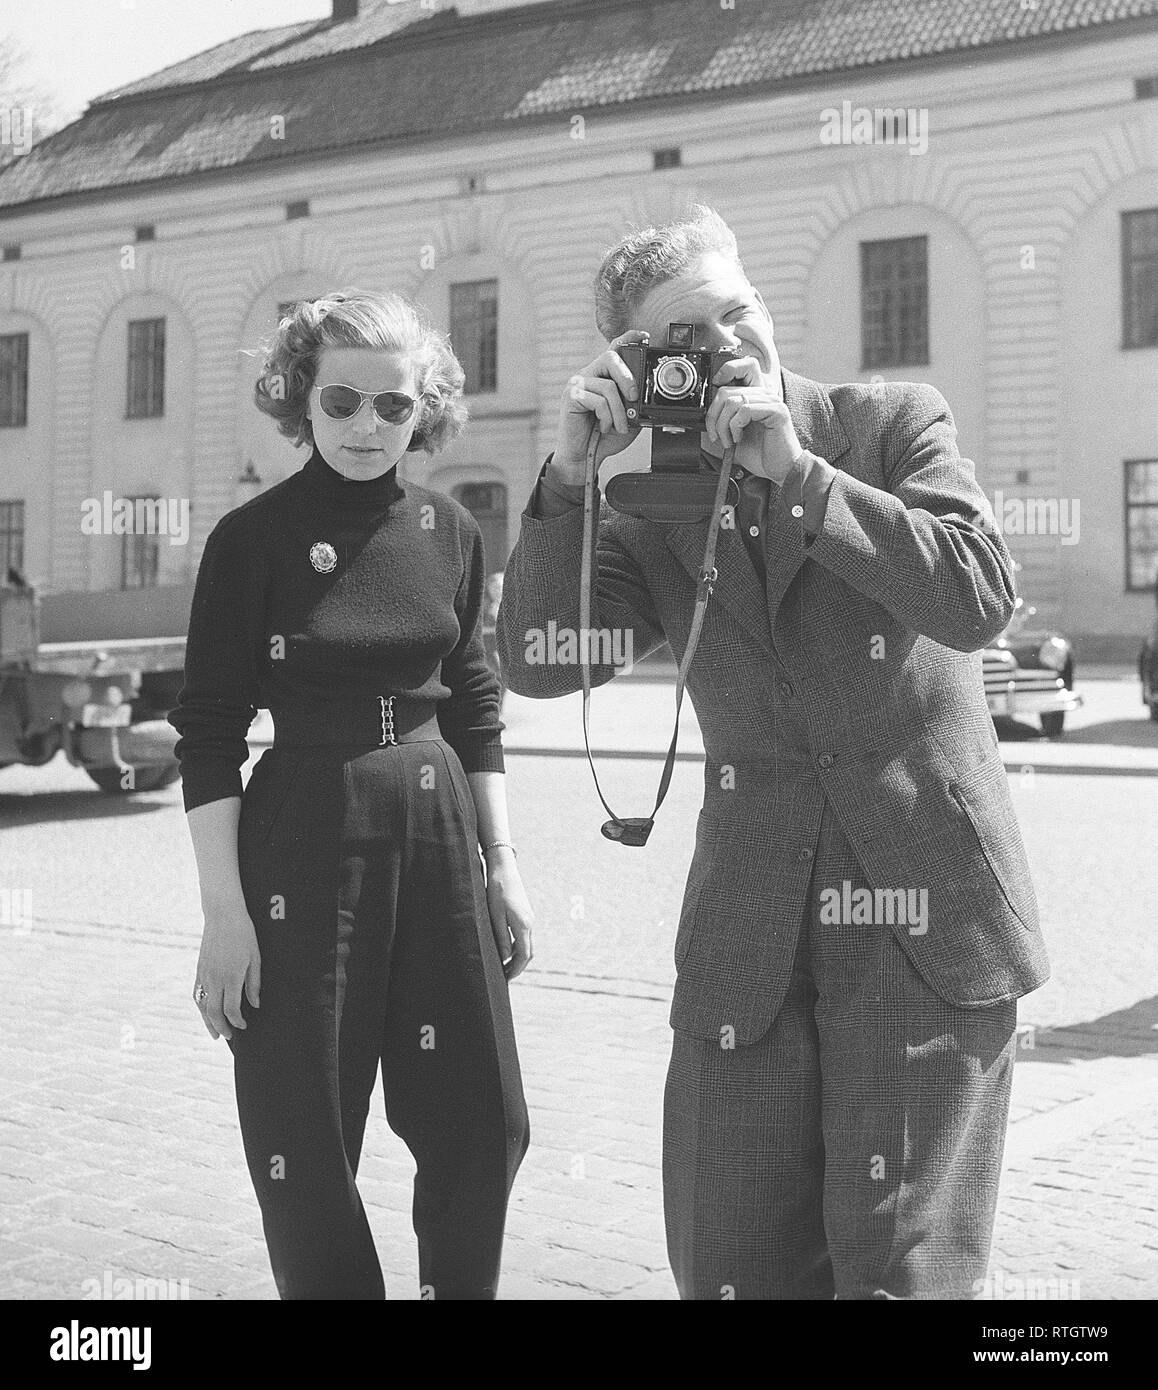 Amateur photographer in the 1950s. A young man is aiming at the photographer with his camera. He is american actor Burgess Meredith taking a picture of his swedish wife Kaja Sundsten.   Sweden 1952. Photo Kristoffersson Ref BF78-1 Stock Photo